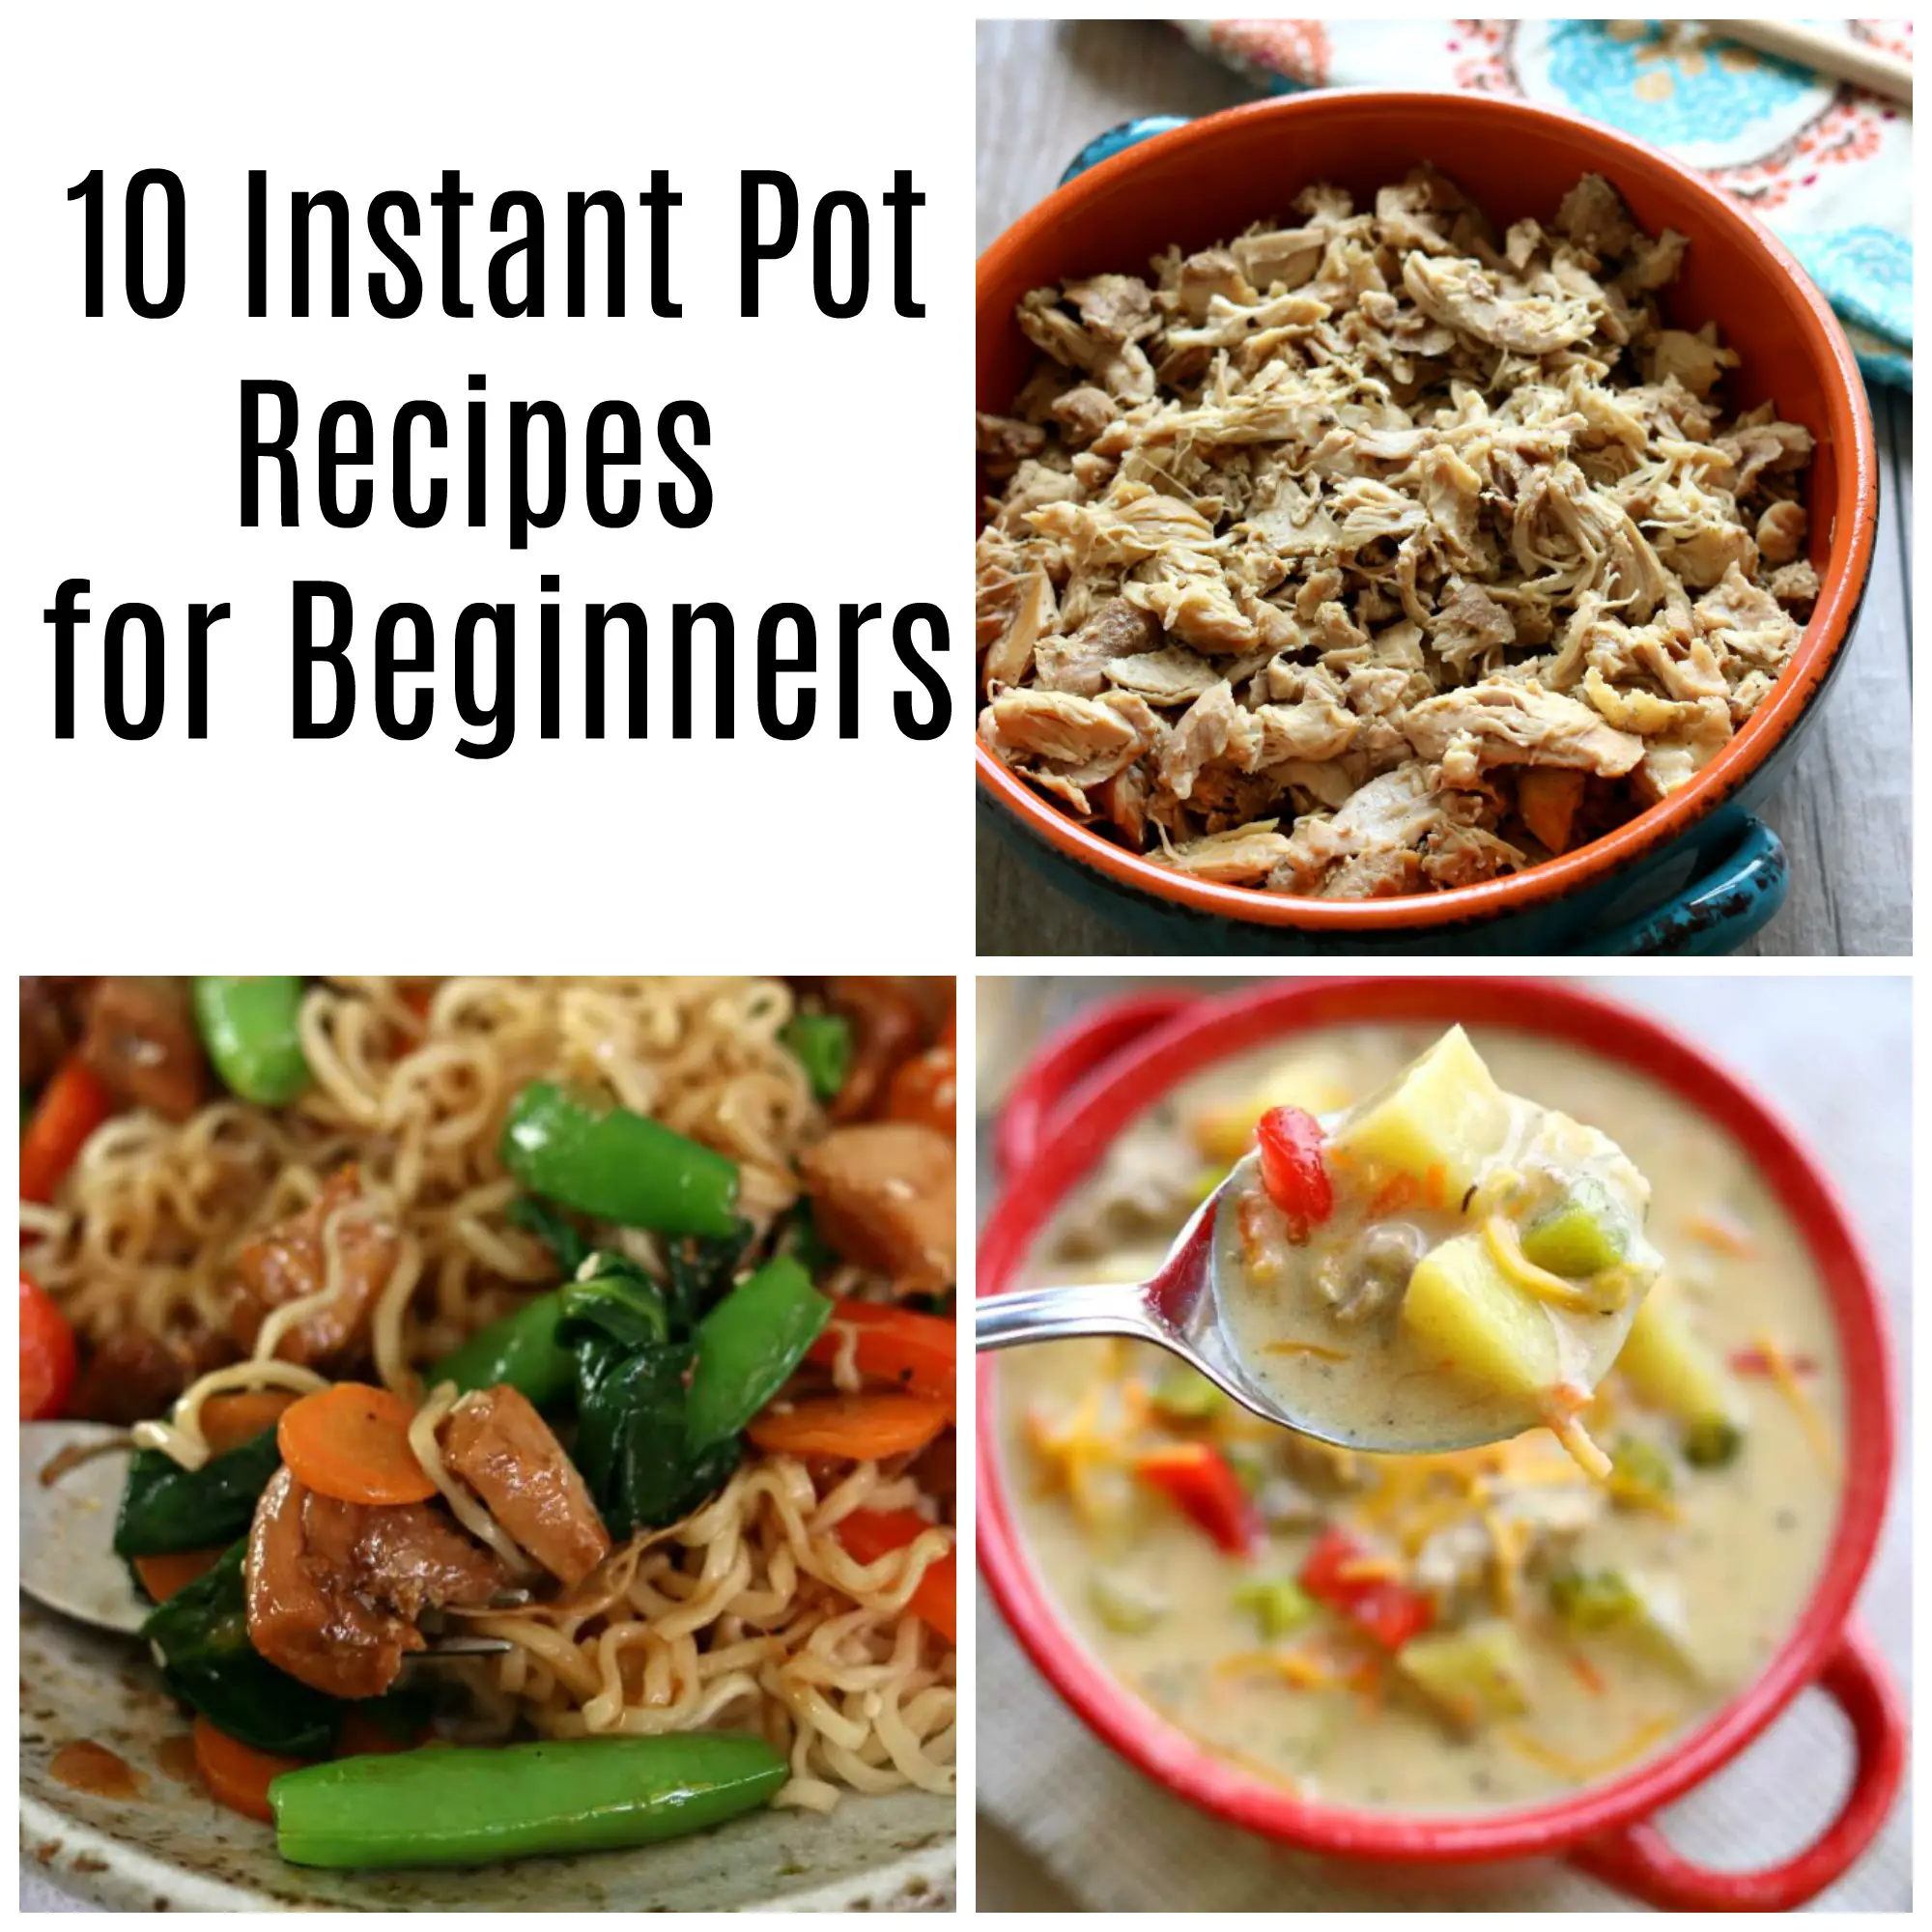 10 Instant Pot Recipes for Beginners